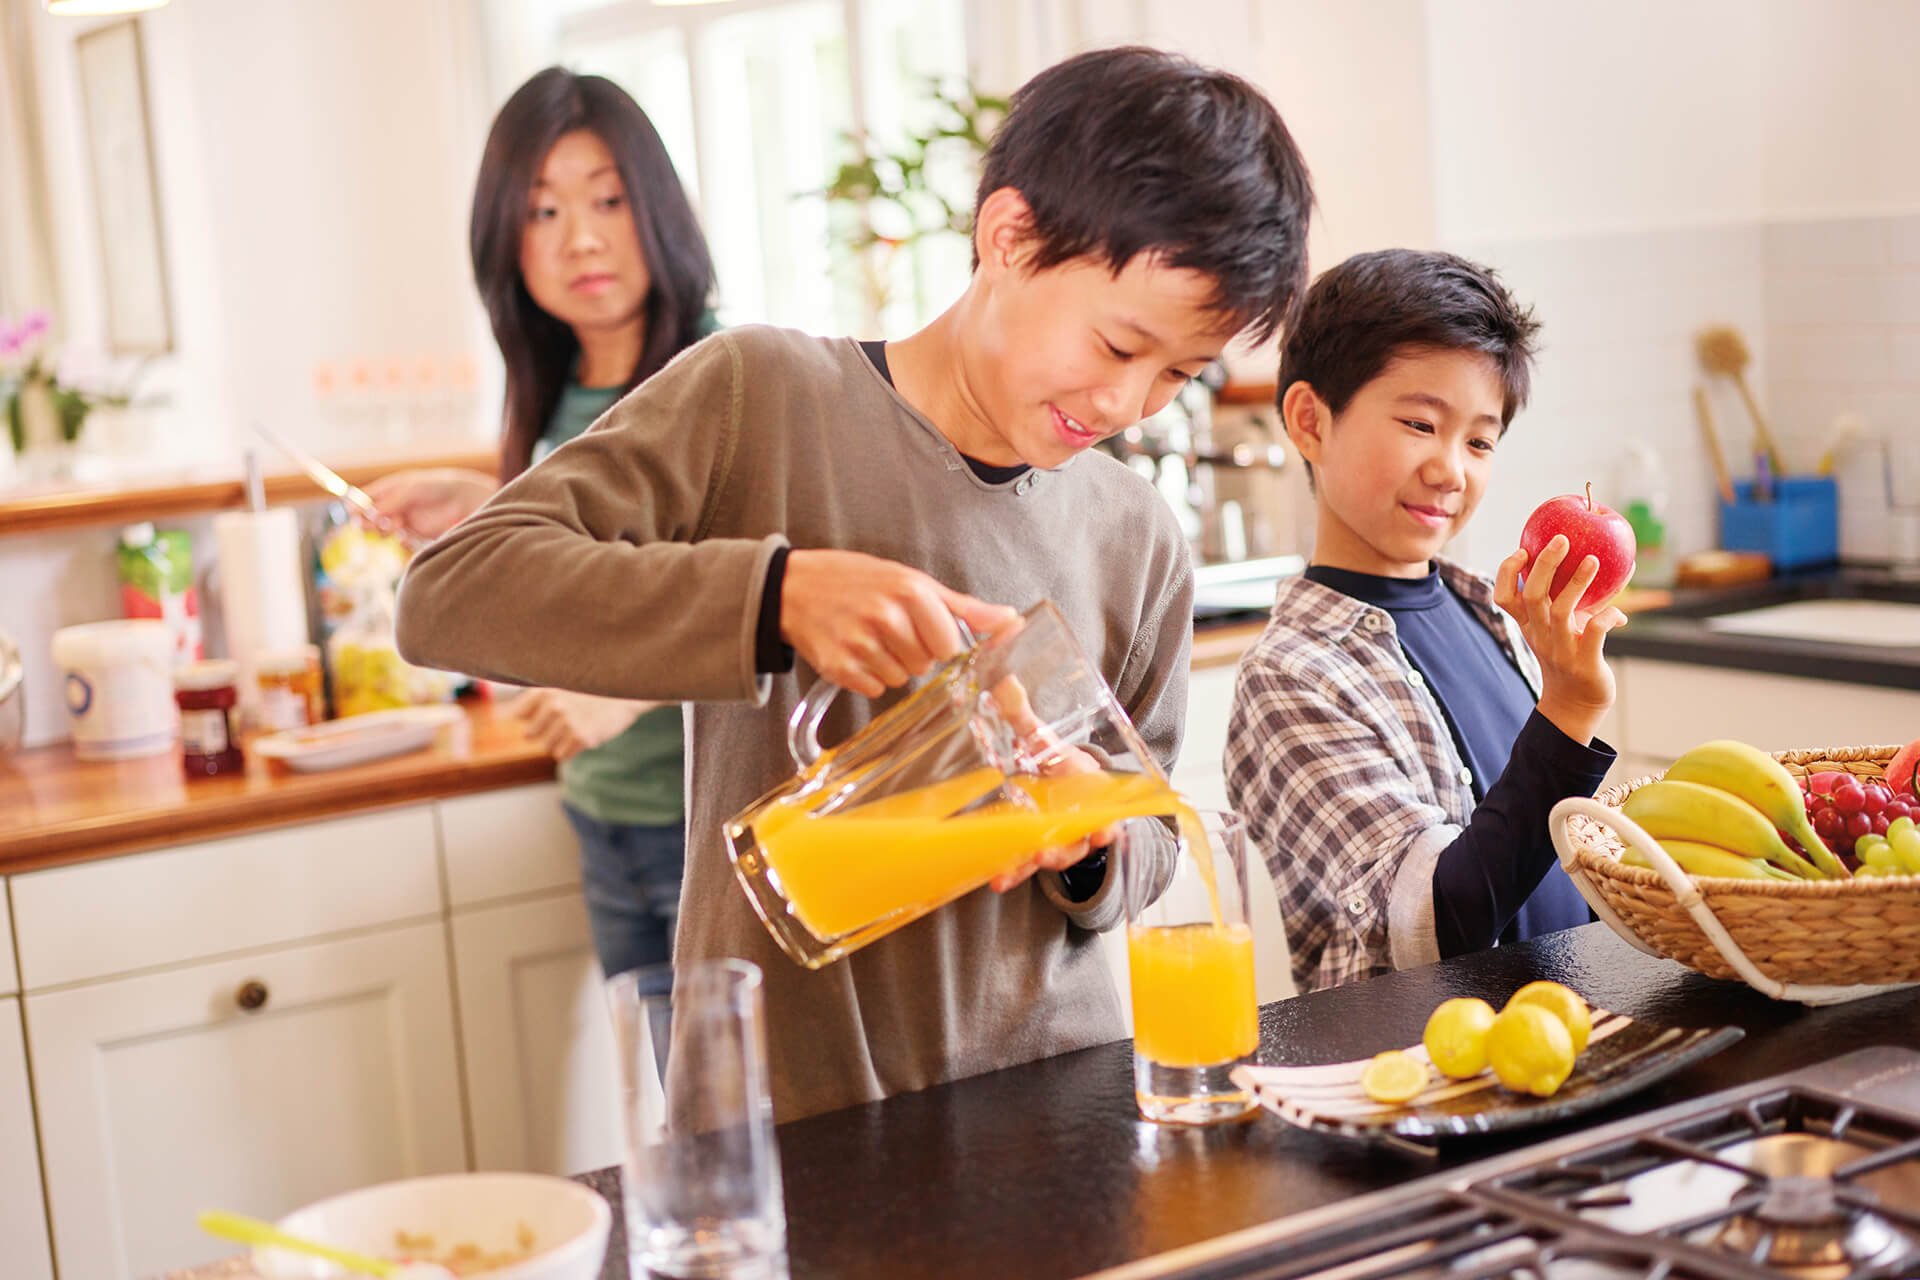 Teen pouring orange juice into glass in the kitchen with family